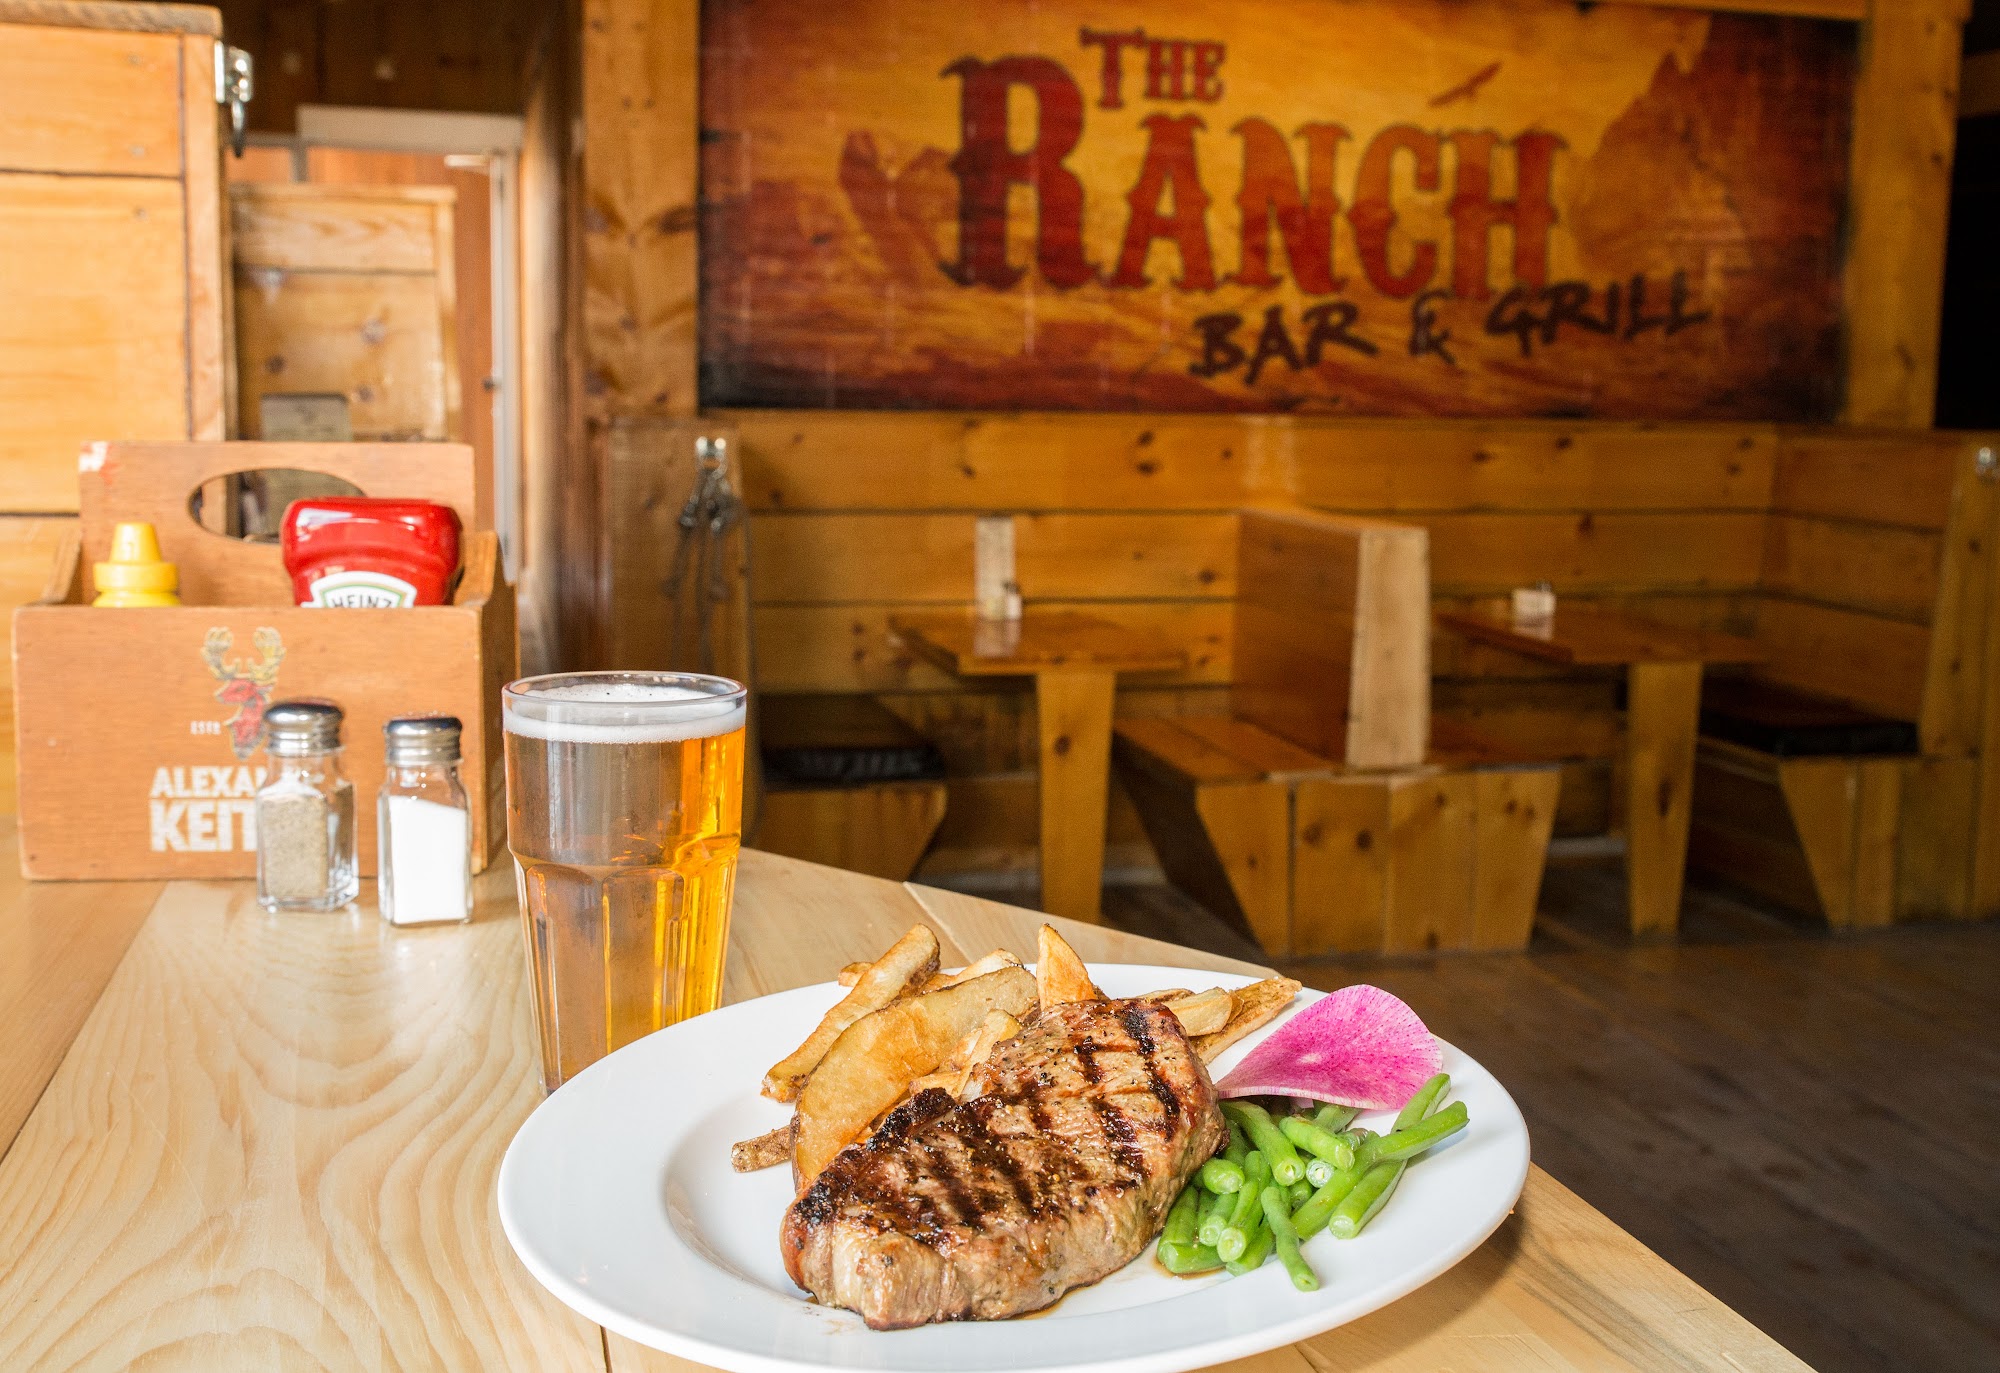 The Ranch 2.0 Bar & Grill